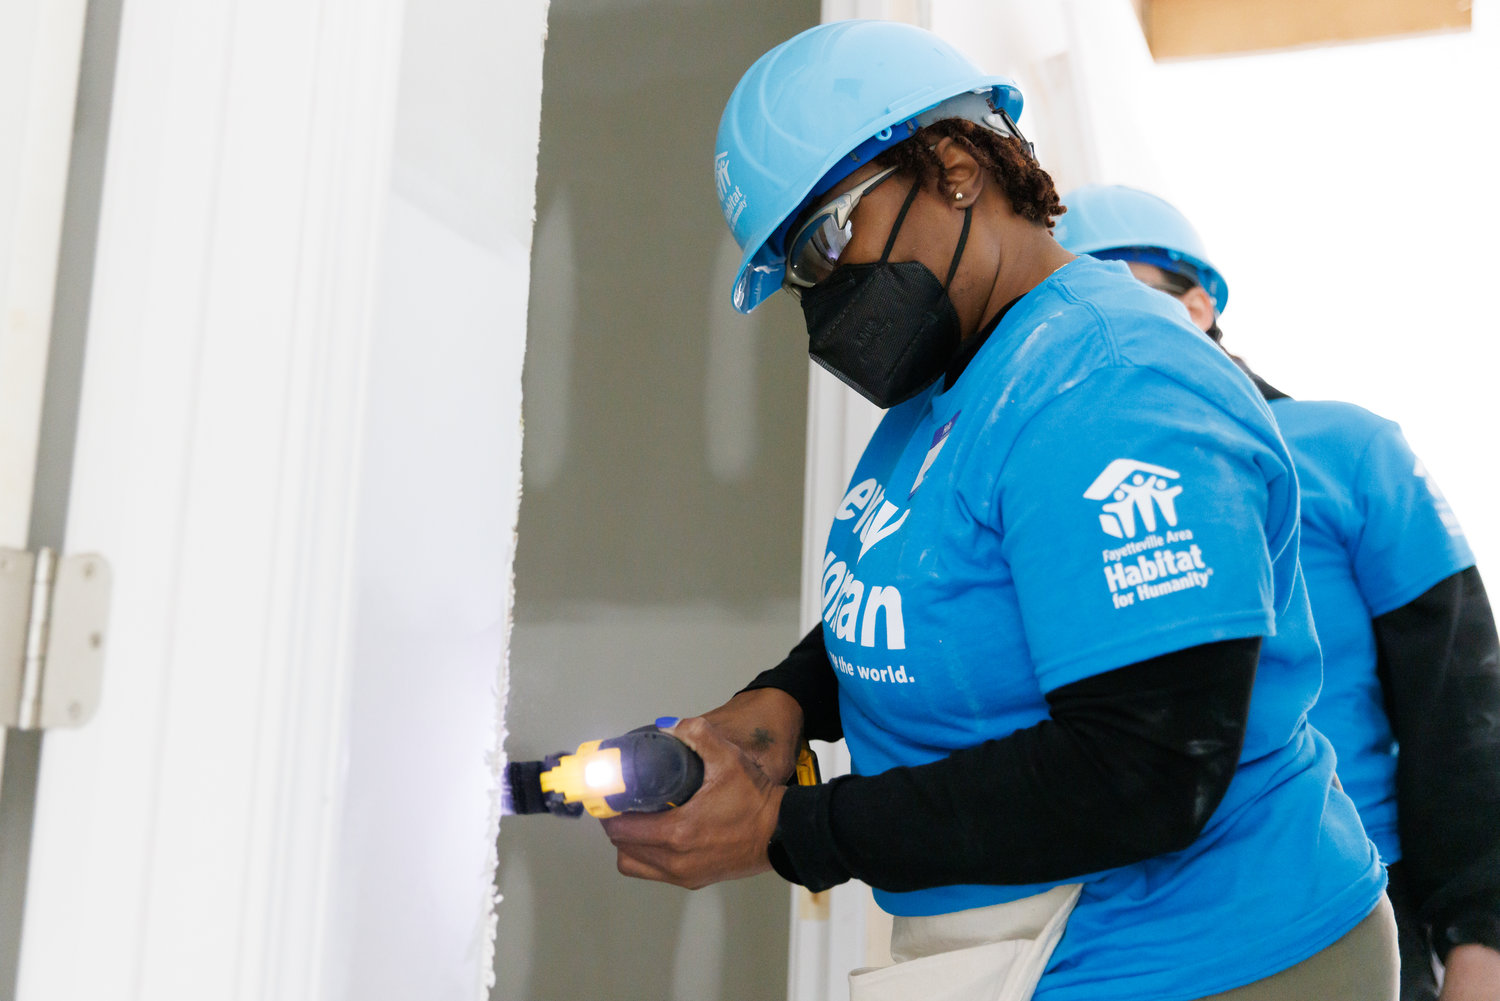 Monique Smith cuts off excess wood from a door frame during the Fayetteville Area Habitat for Humanity's annual "Women Build'' event on March 5. The organization announced Tuesday that it has received a $5 million gift that it will use to address affordable housing issues in Cumberland, Sampson and Bladen counties.